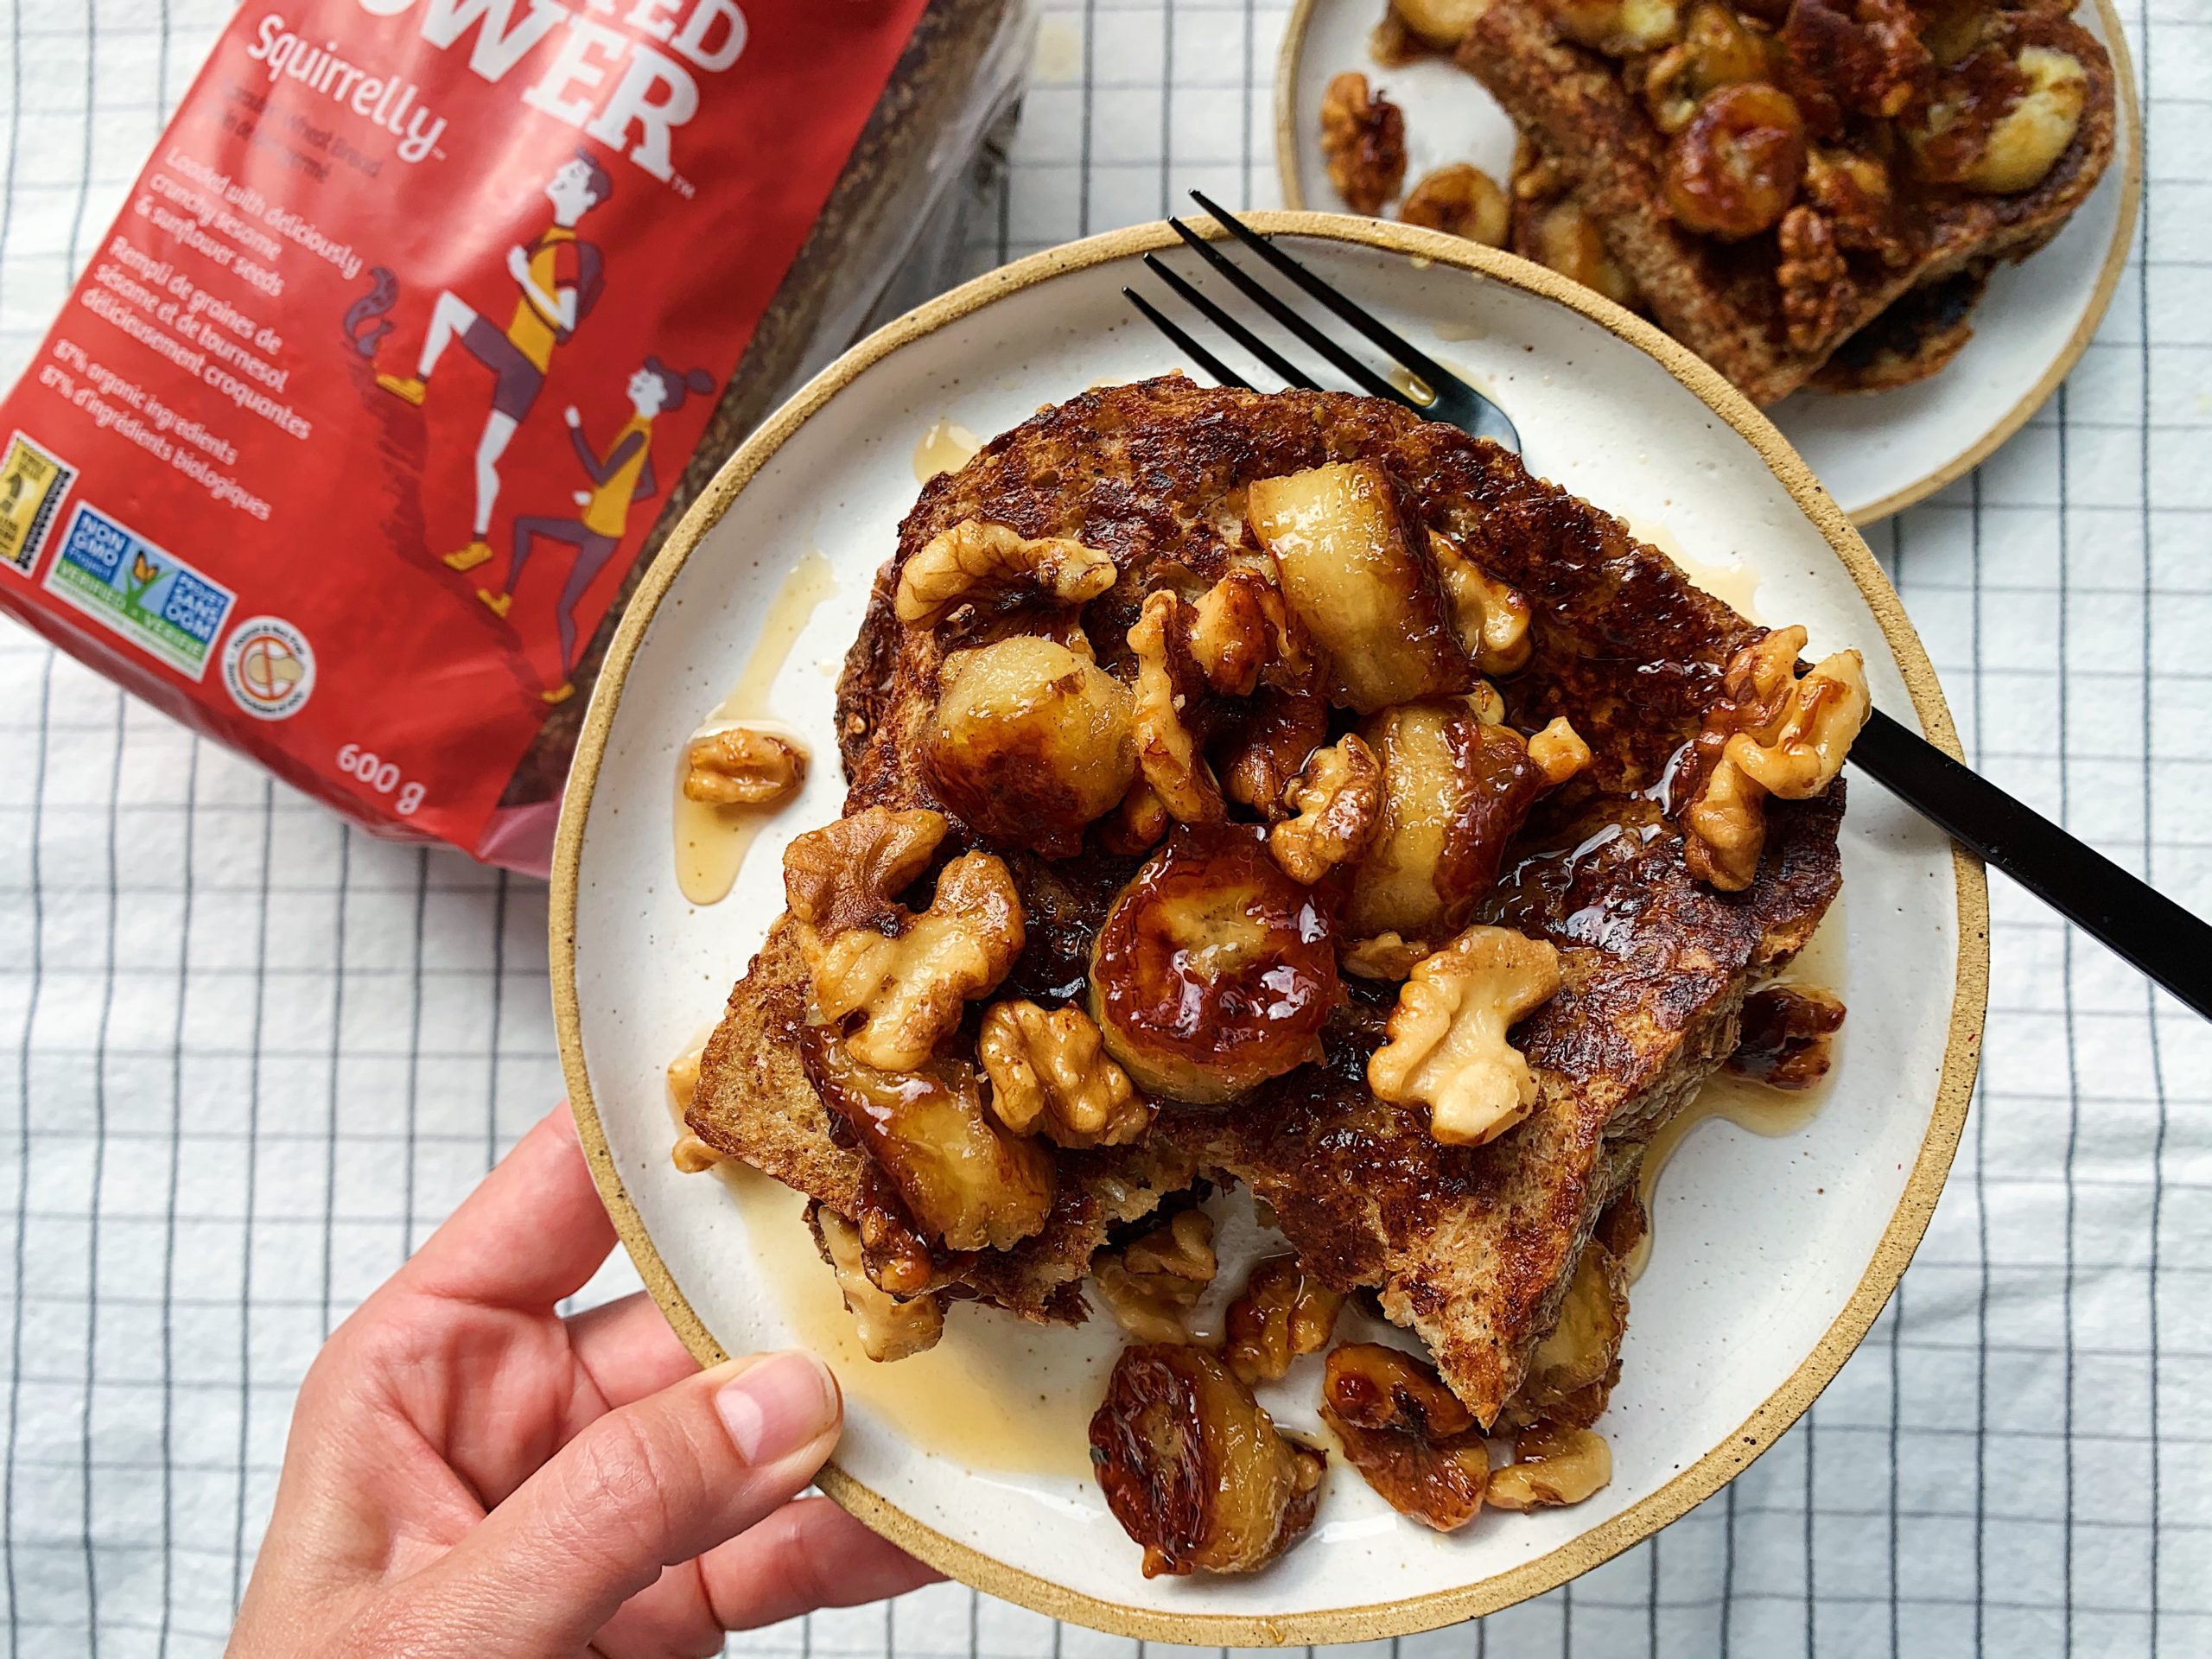 Vegan French Toast with Caramelized Bananas and Walnuts